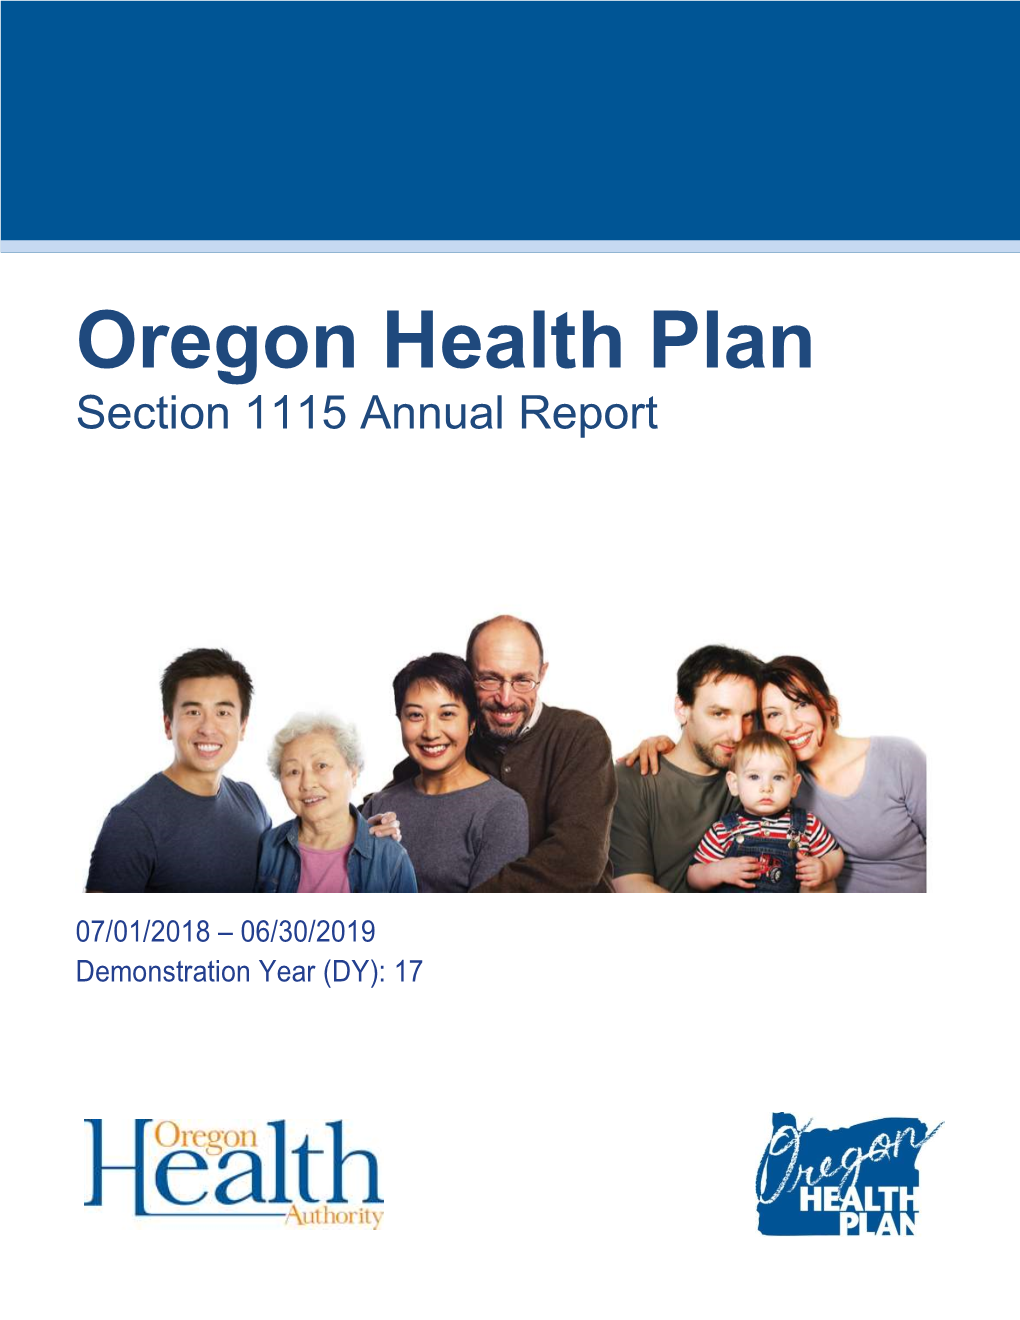 Oregon Health Plan Section 1115 Annual Report